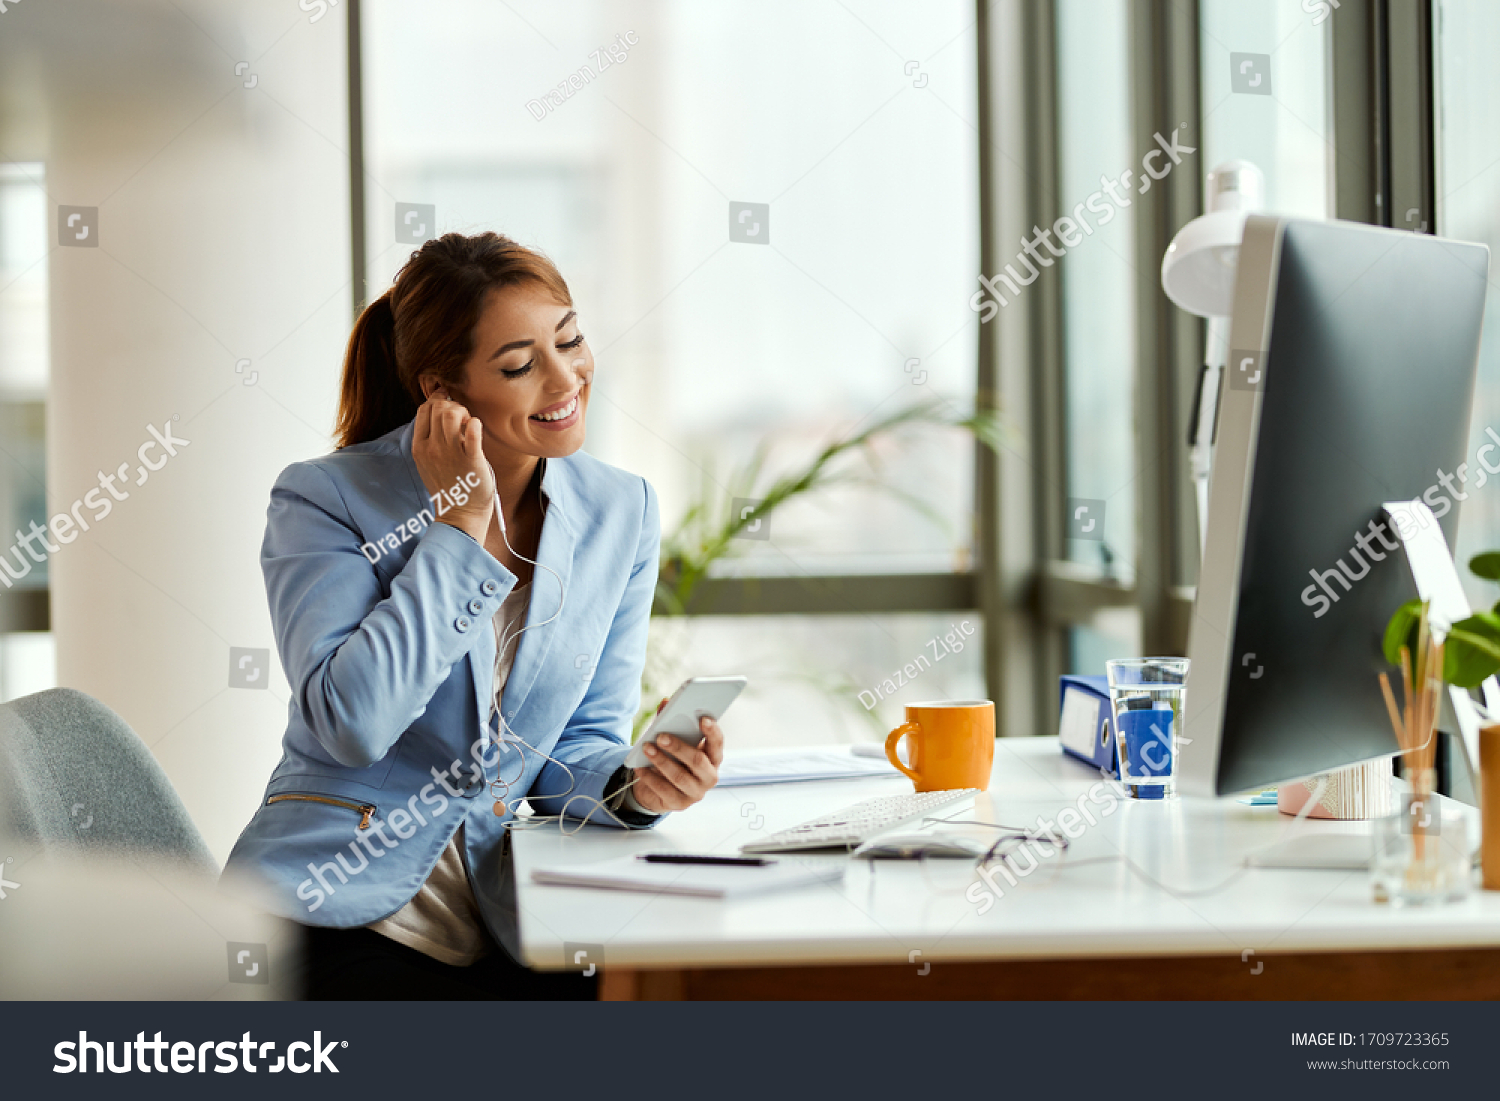 Young businesswoman relaxing while using mobile phone and listening music over earphones in the office. #1709723365